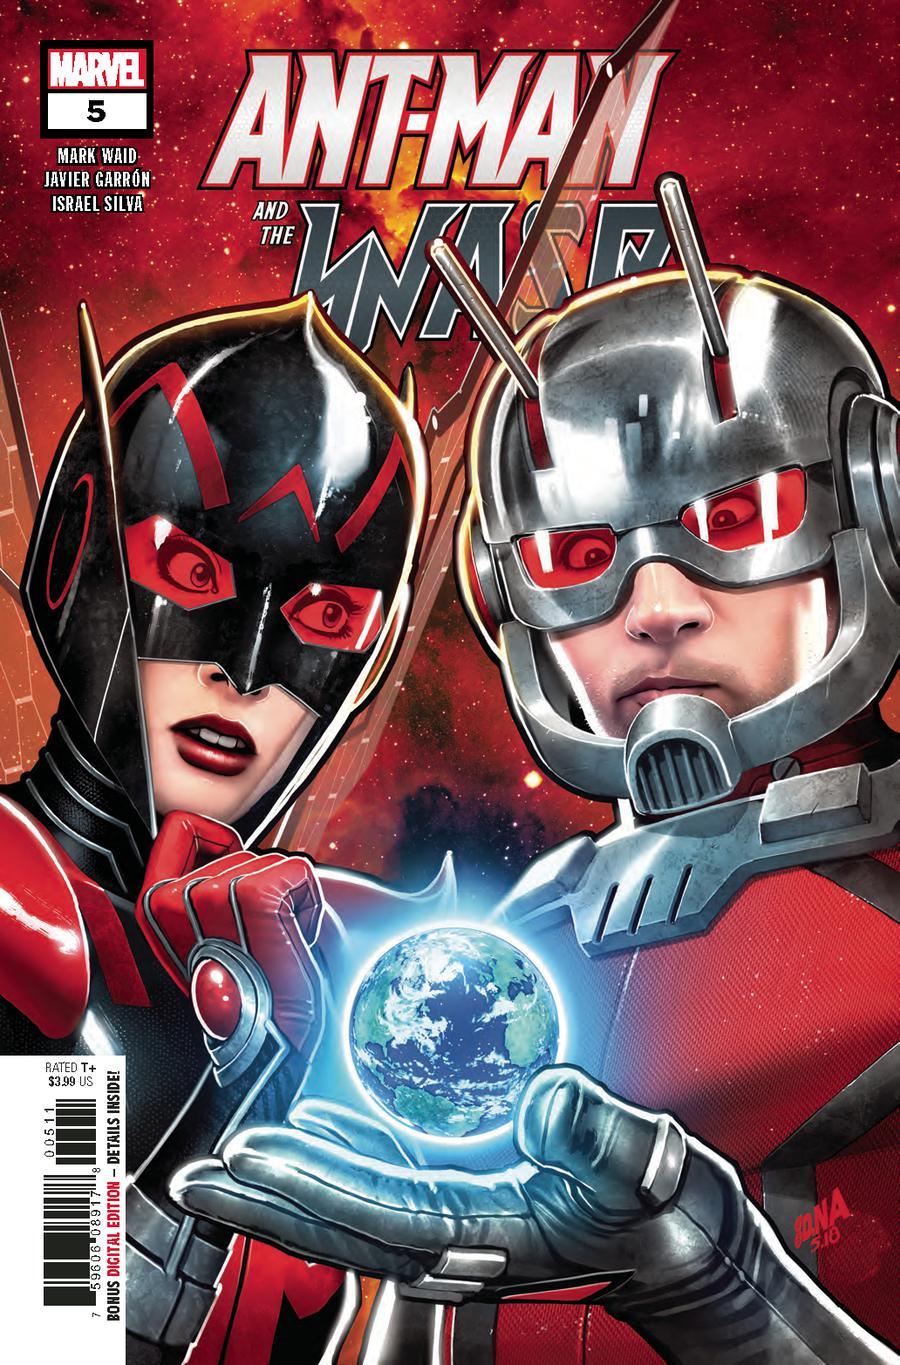 Ant-Man and the Wasp Vol. 1 #5